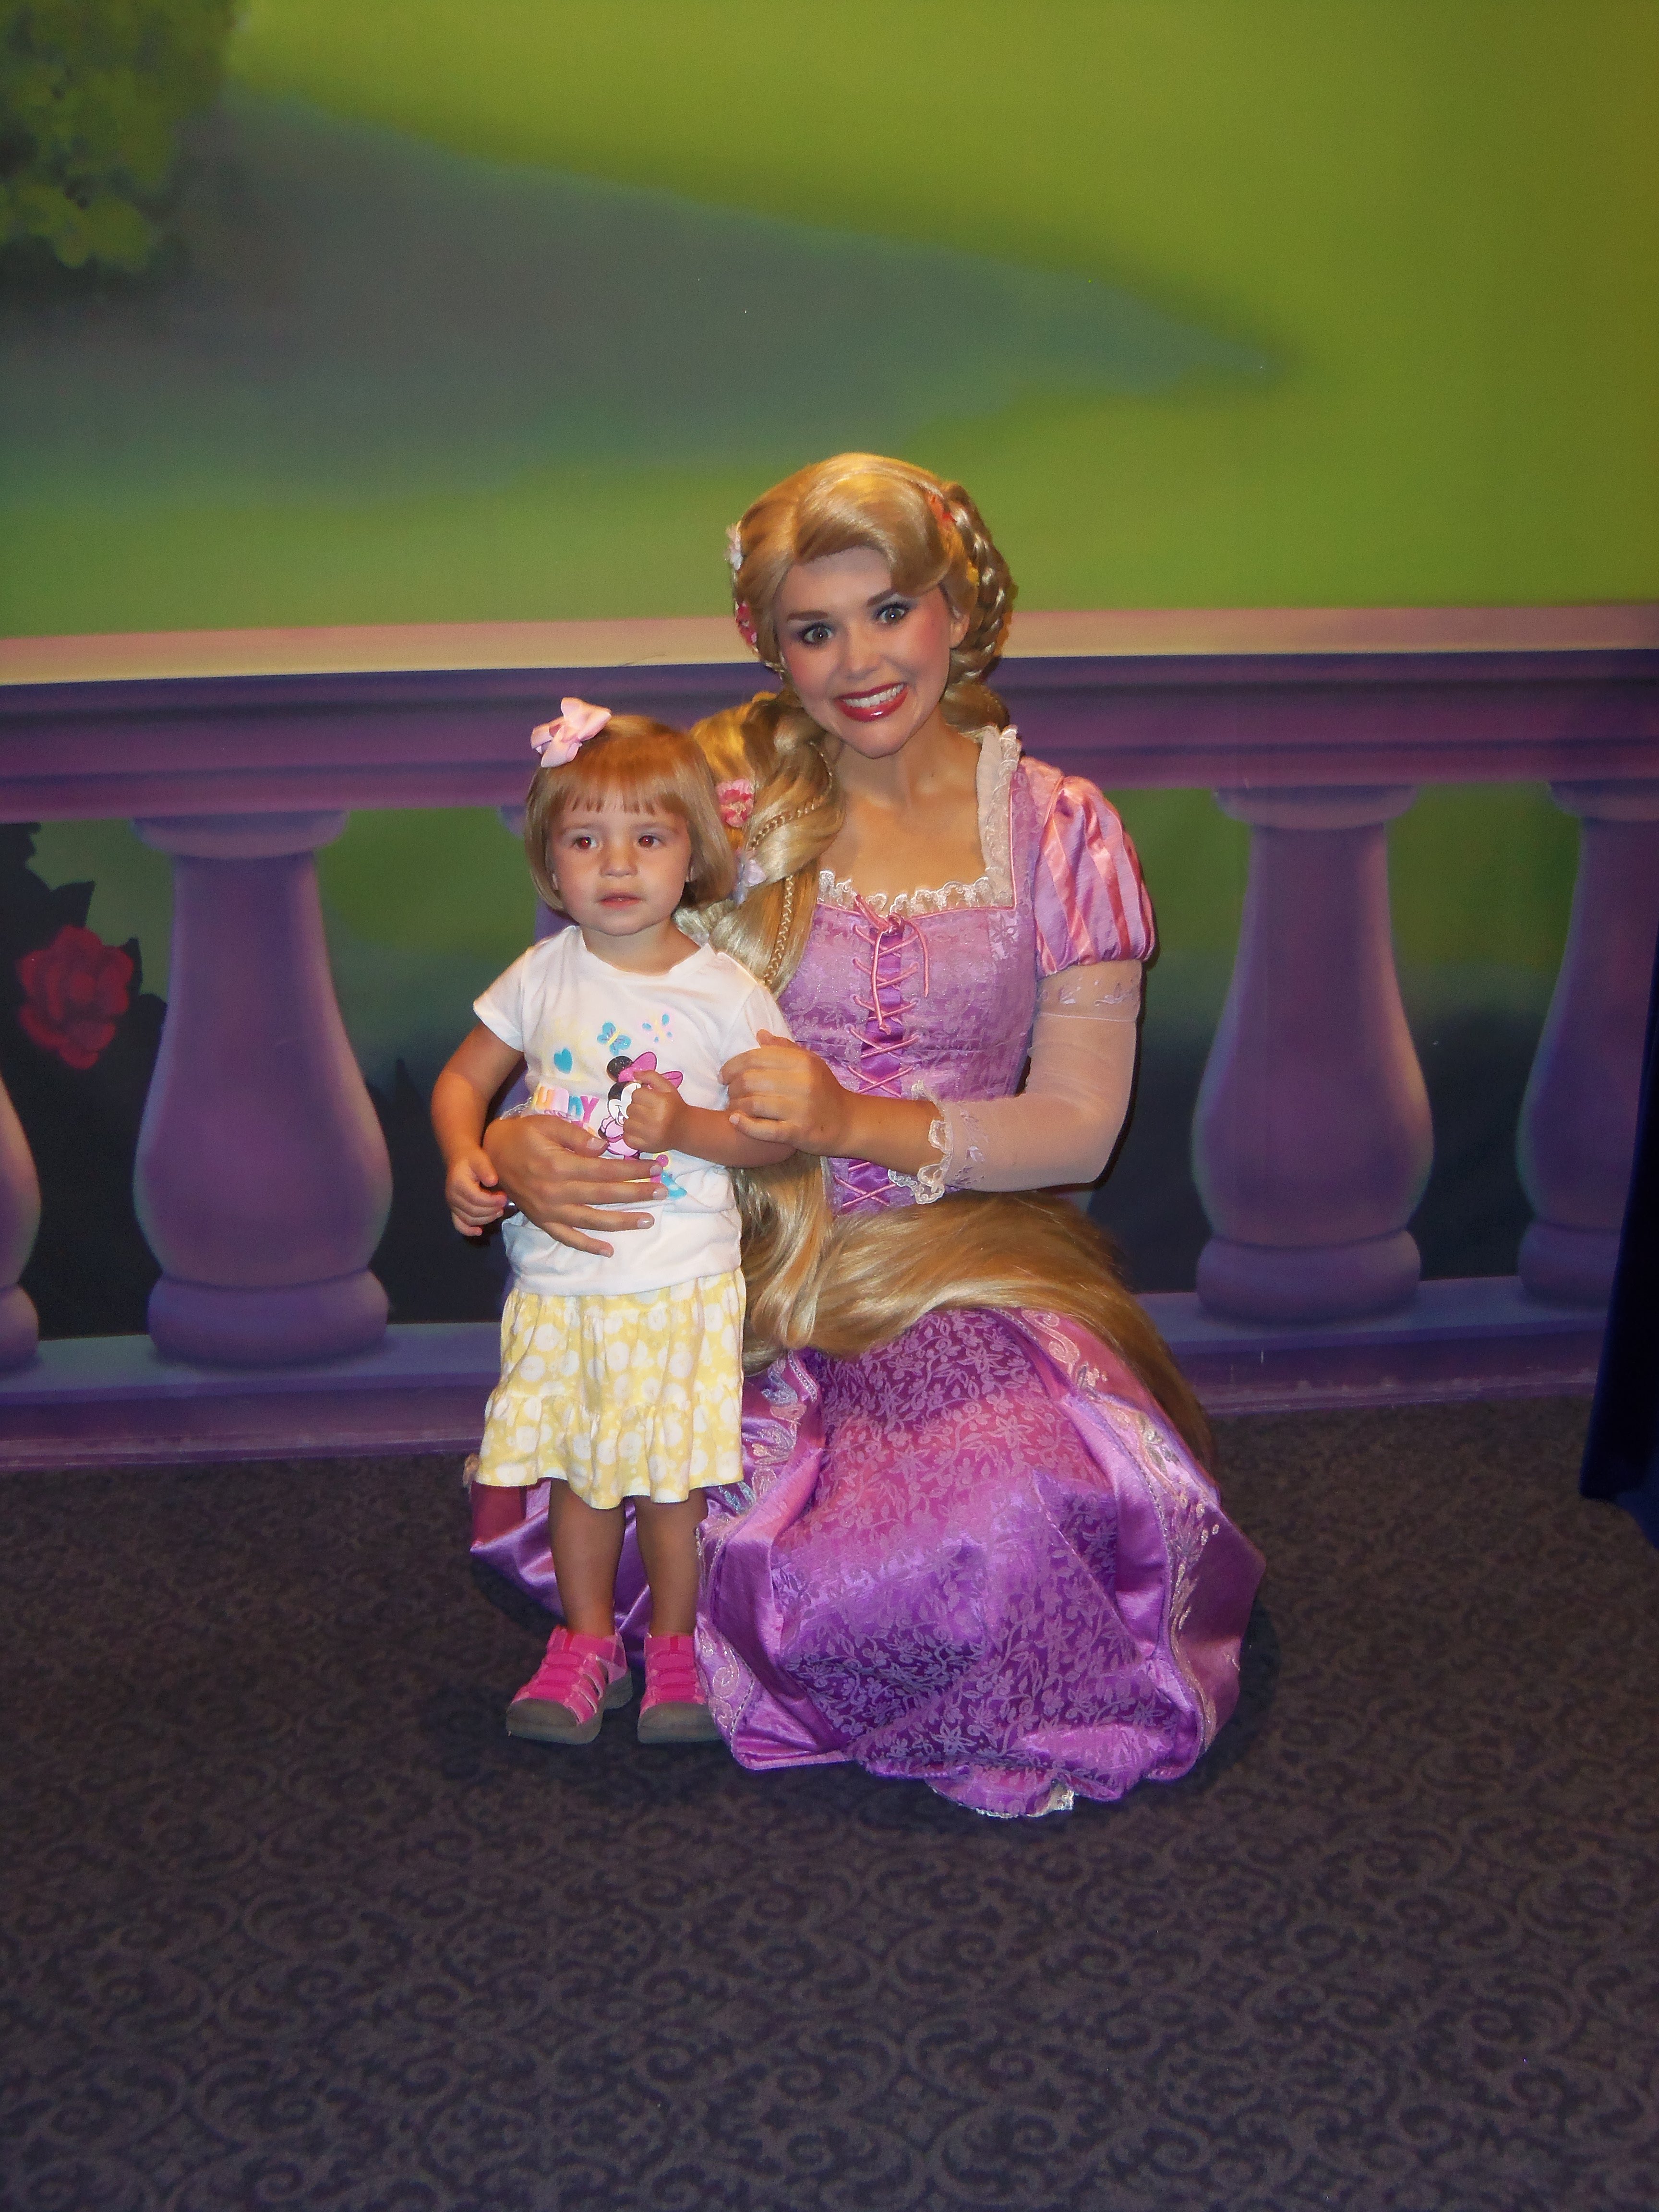 They began their morning with Princess meets at Town Square Theater.